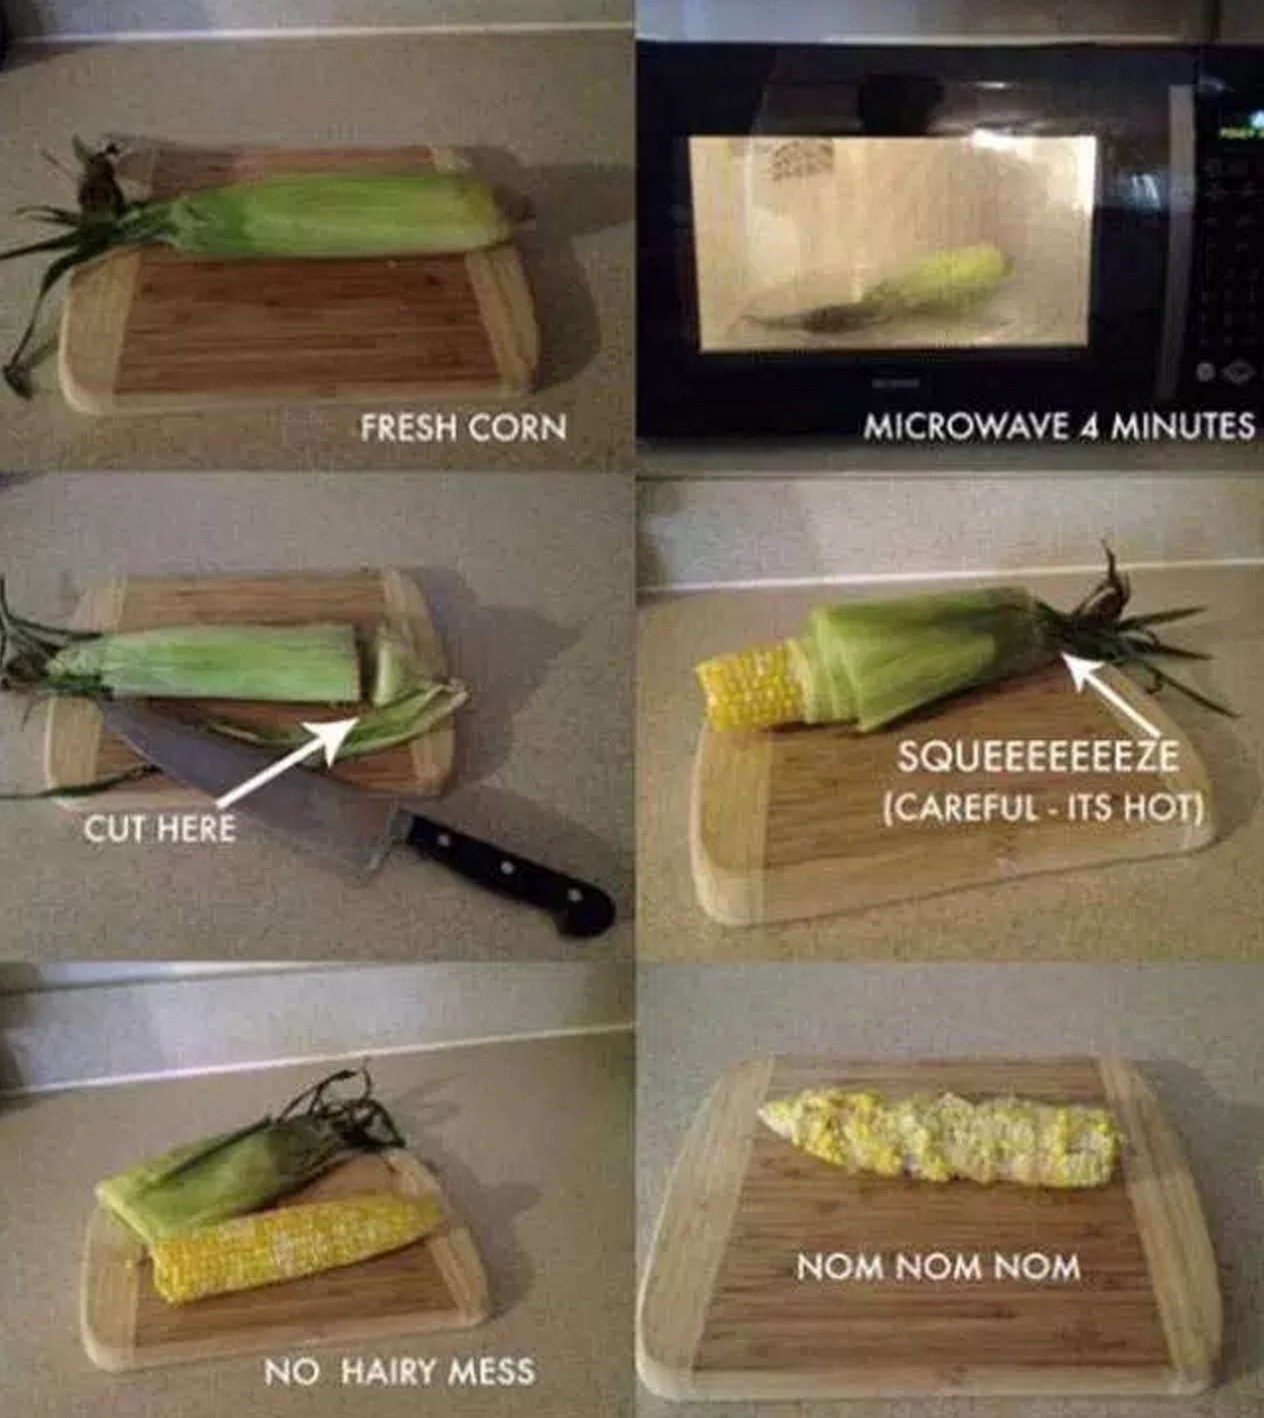 Check out this "magic corn" trick to keep those husks intact.